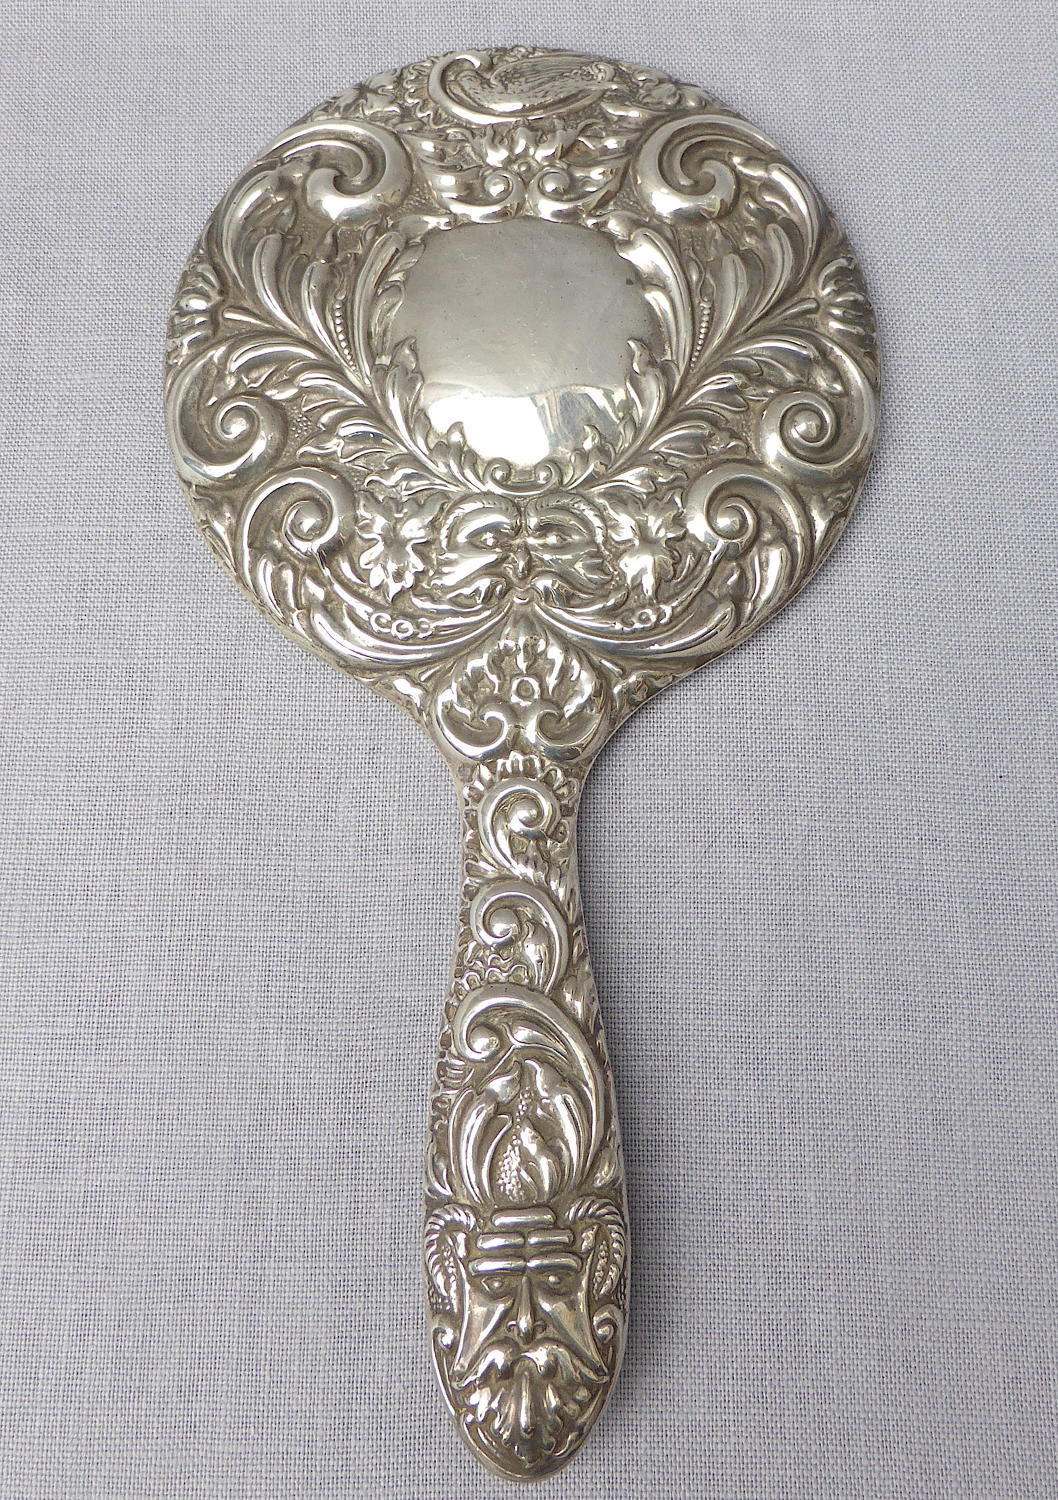 Repoussé silver hand mirror by Broadway & Co 1982